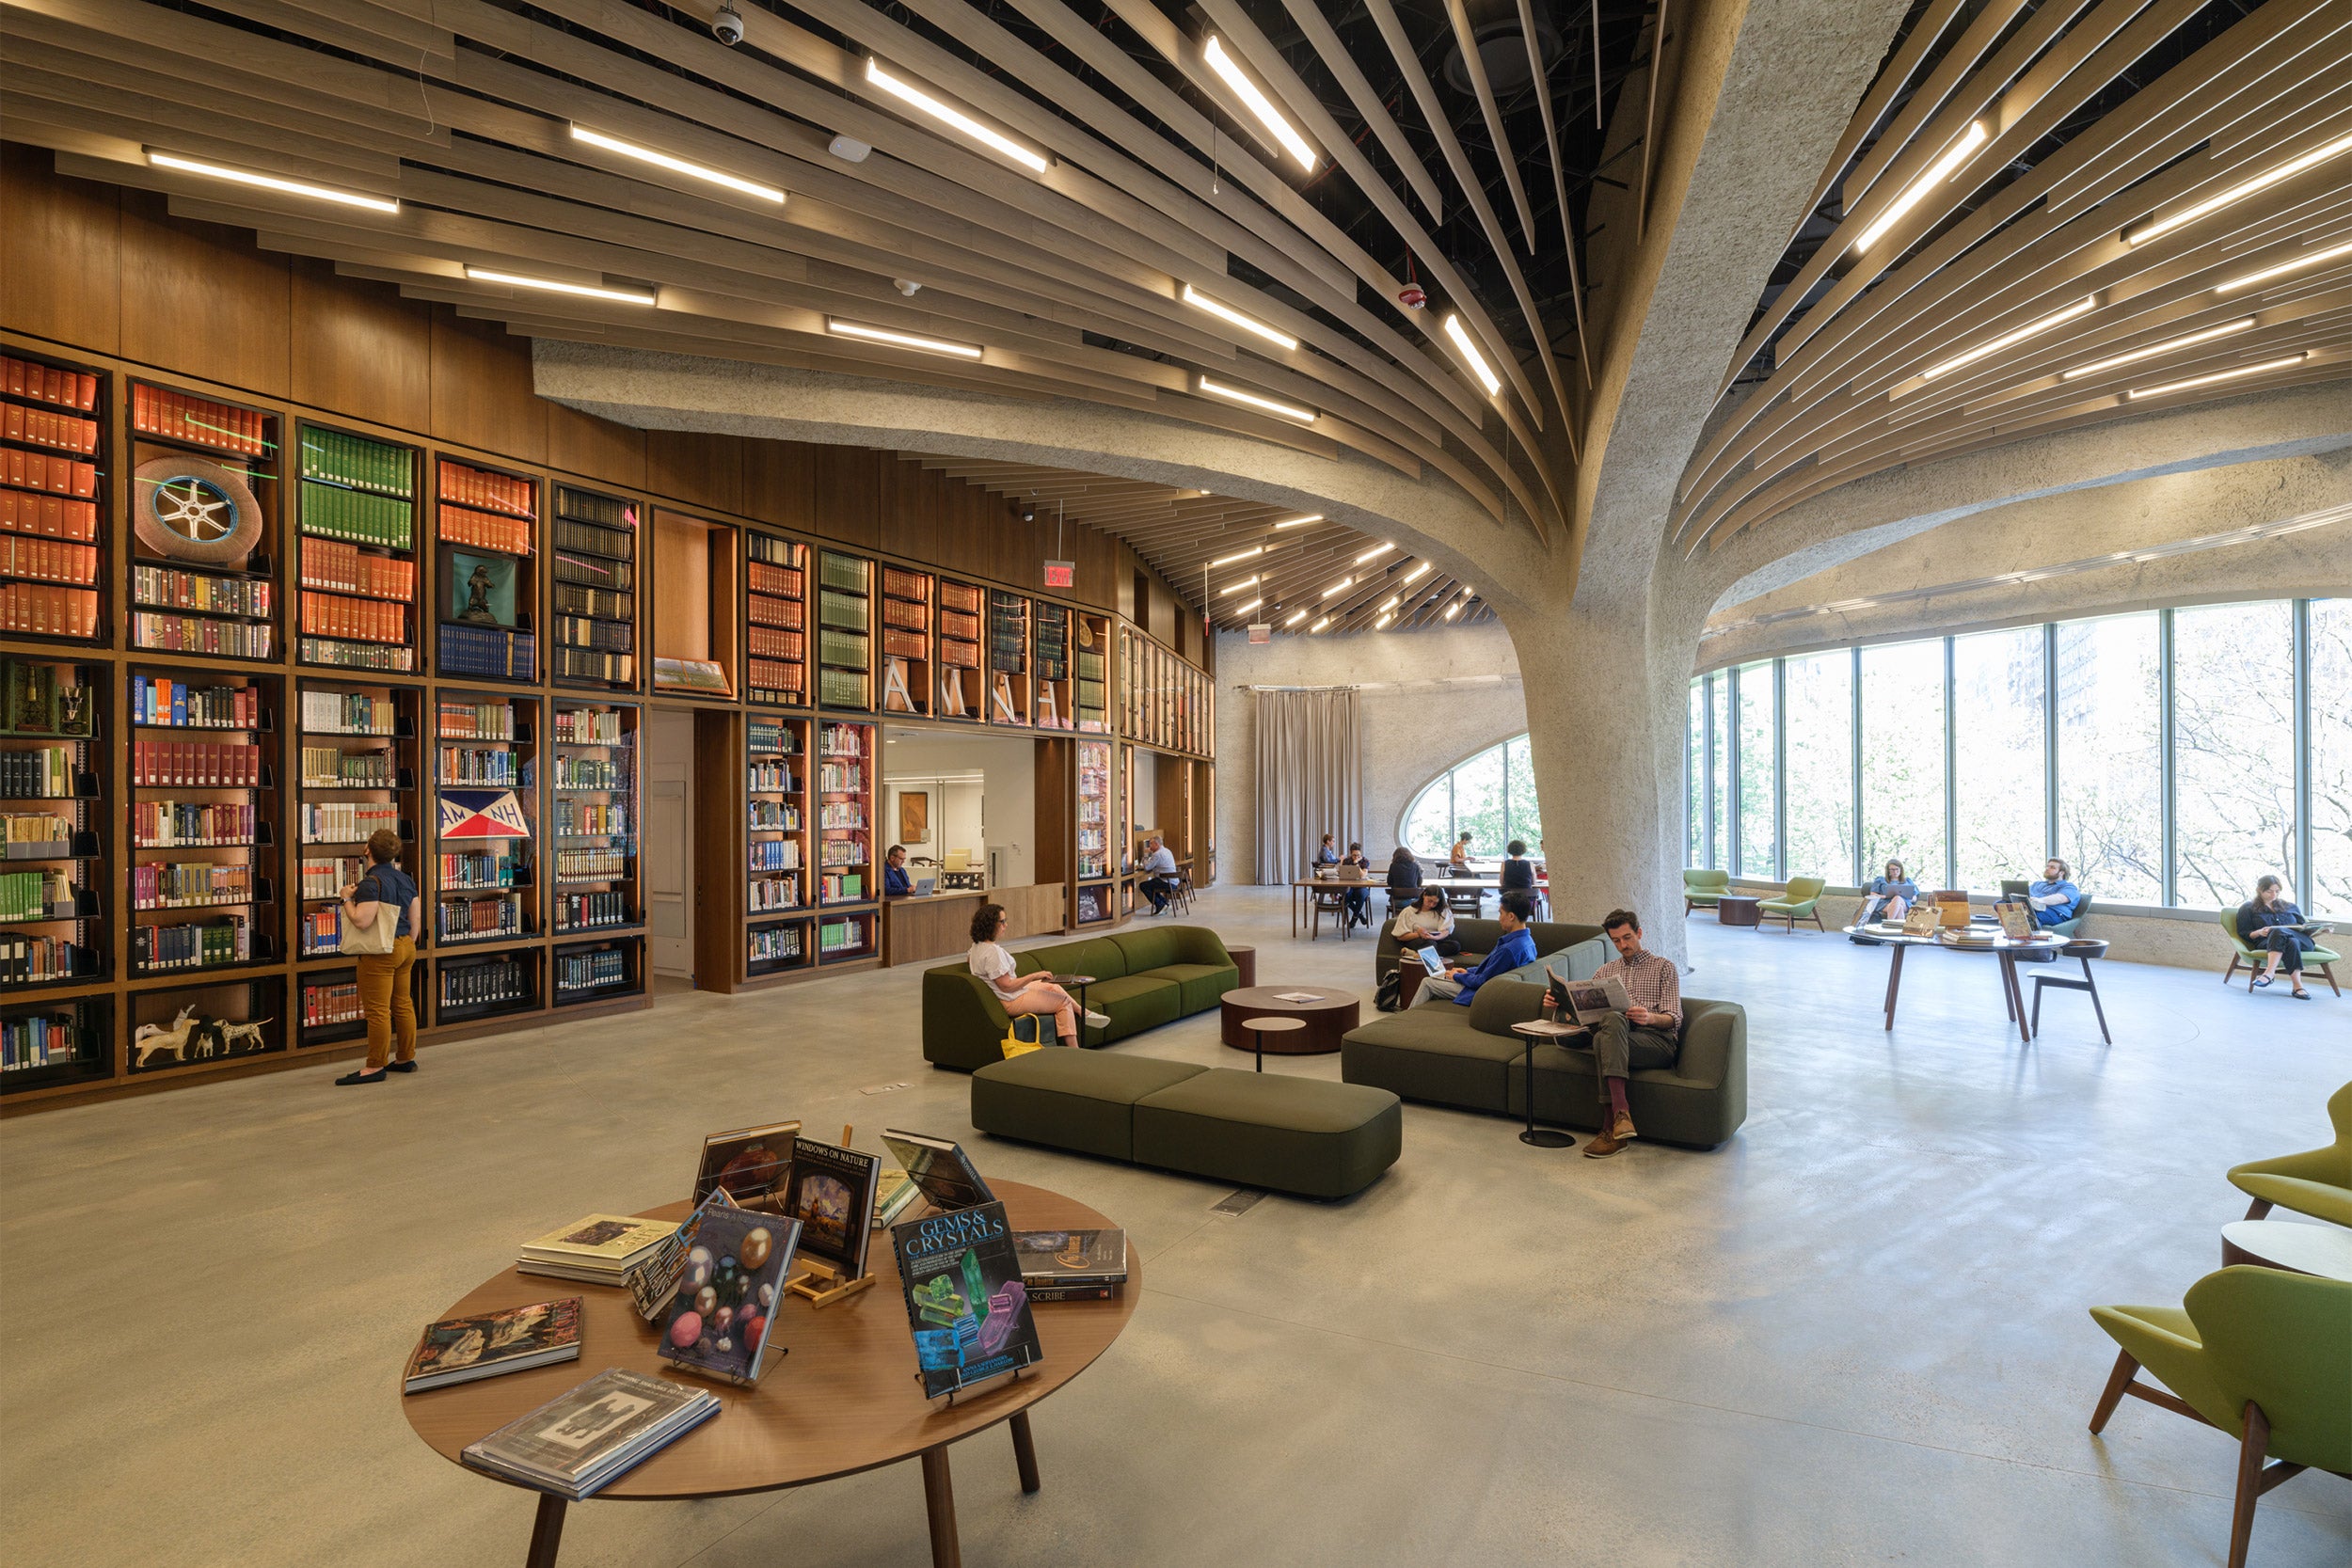 View of sunny, spacious Gilder Center library's mushroom like ceiling with large column.